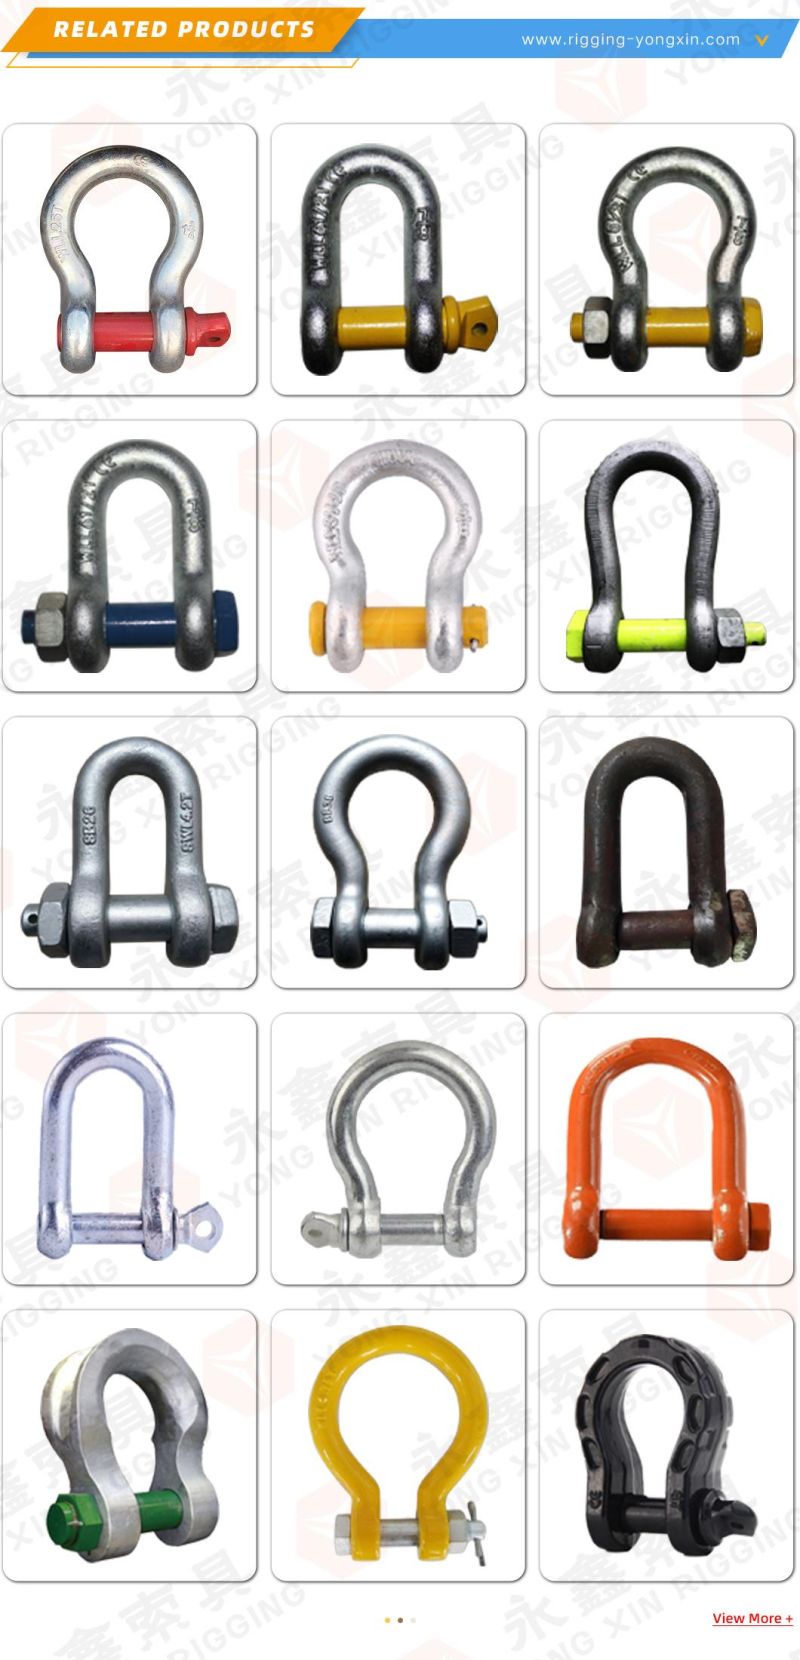 Marine Hardware Electric Galvanized Us Type Carbon Steel Drop Forged Screw Pin D Shackle